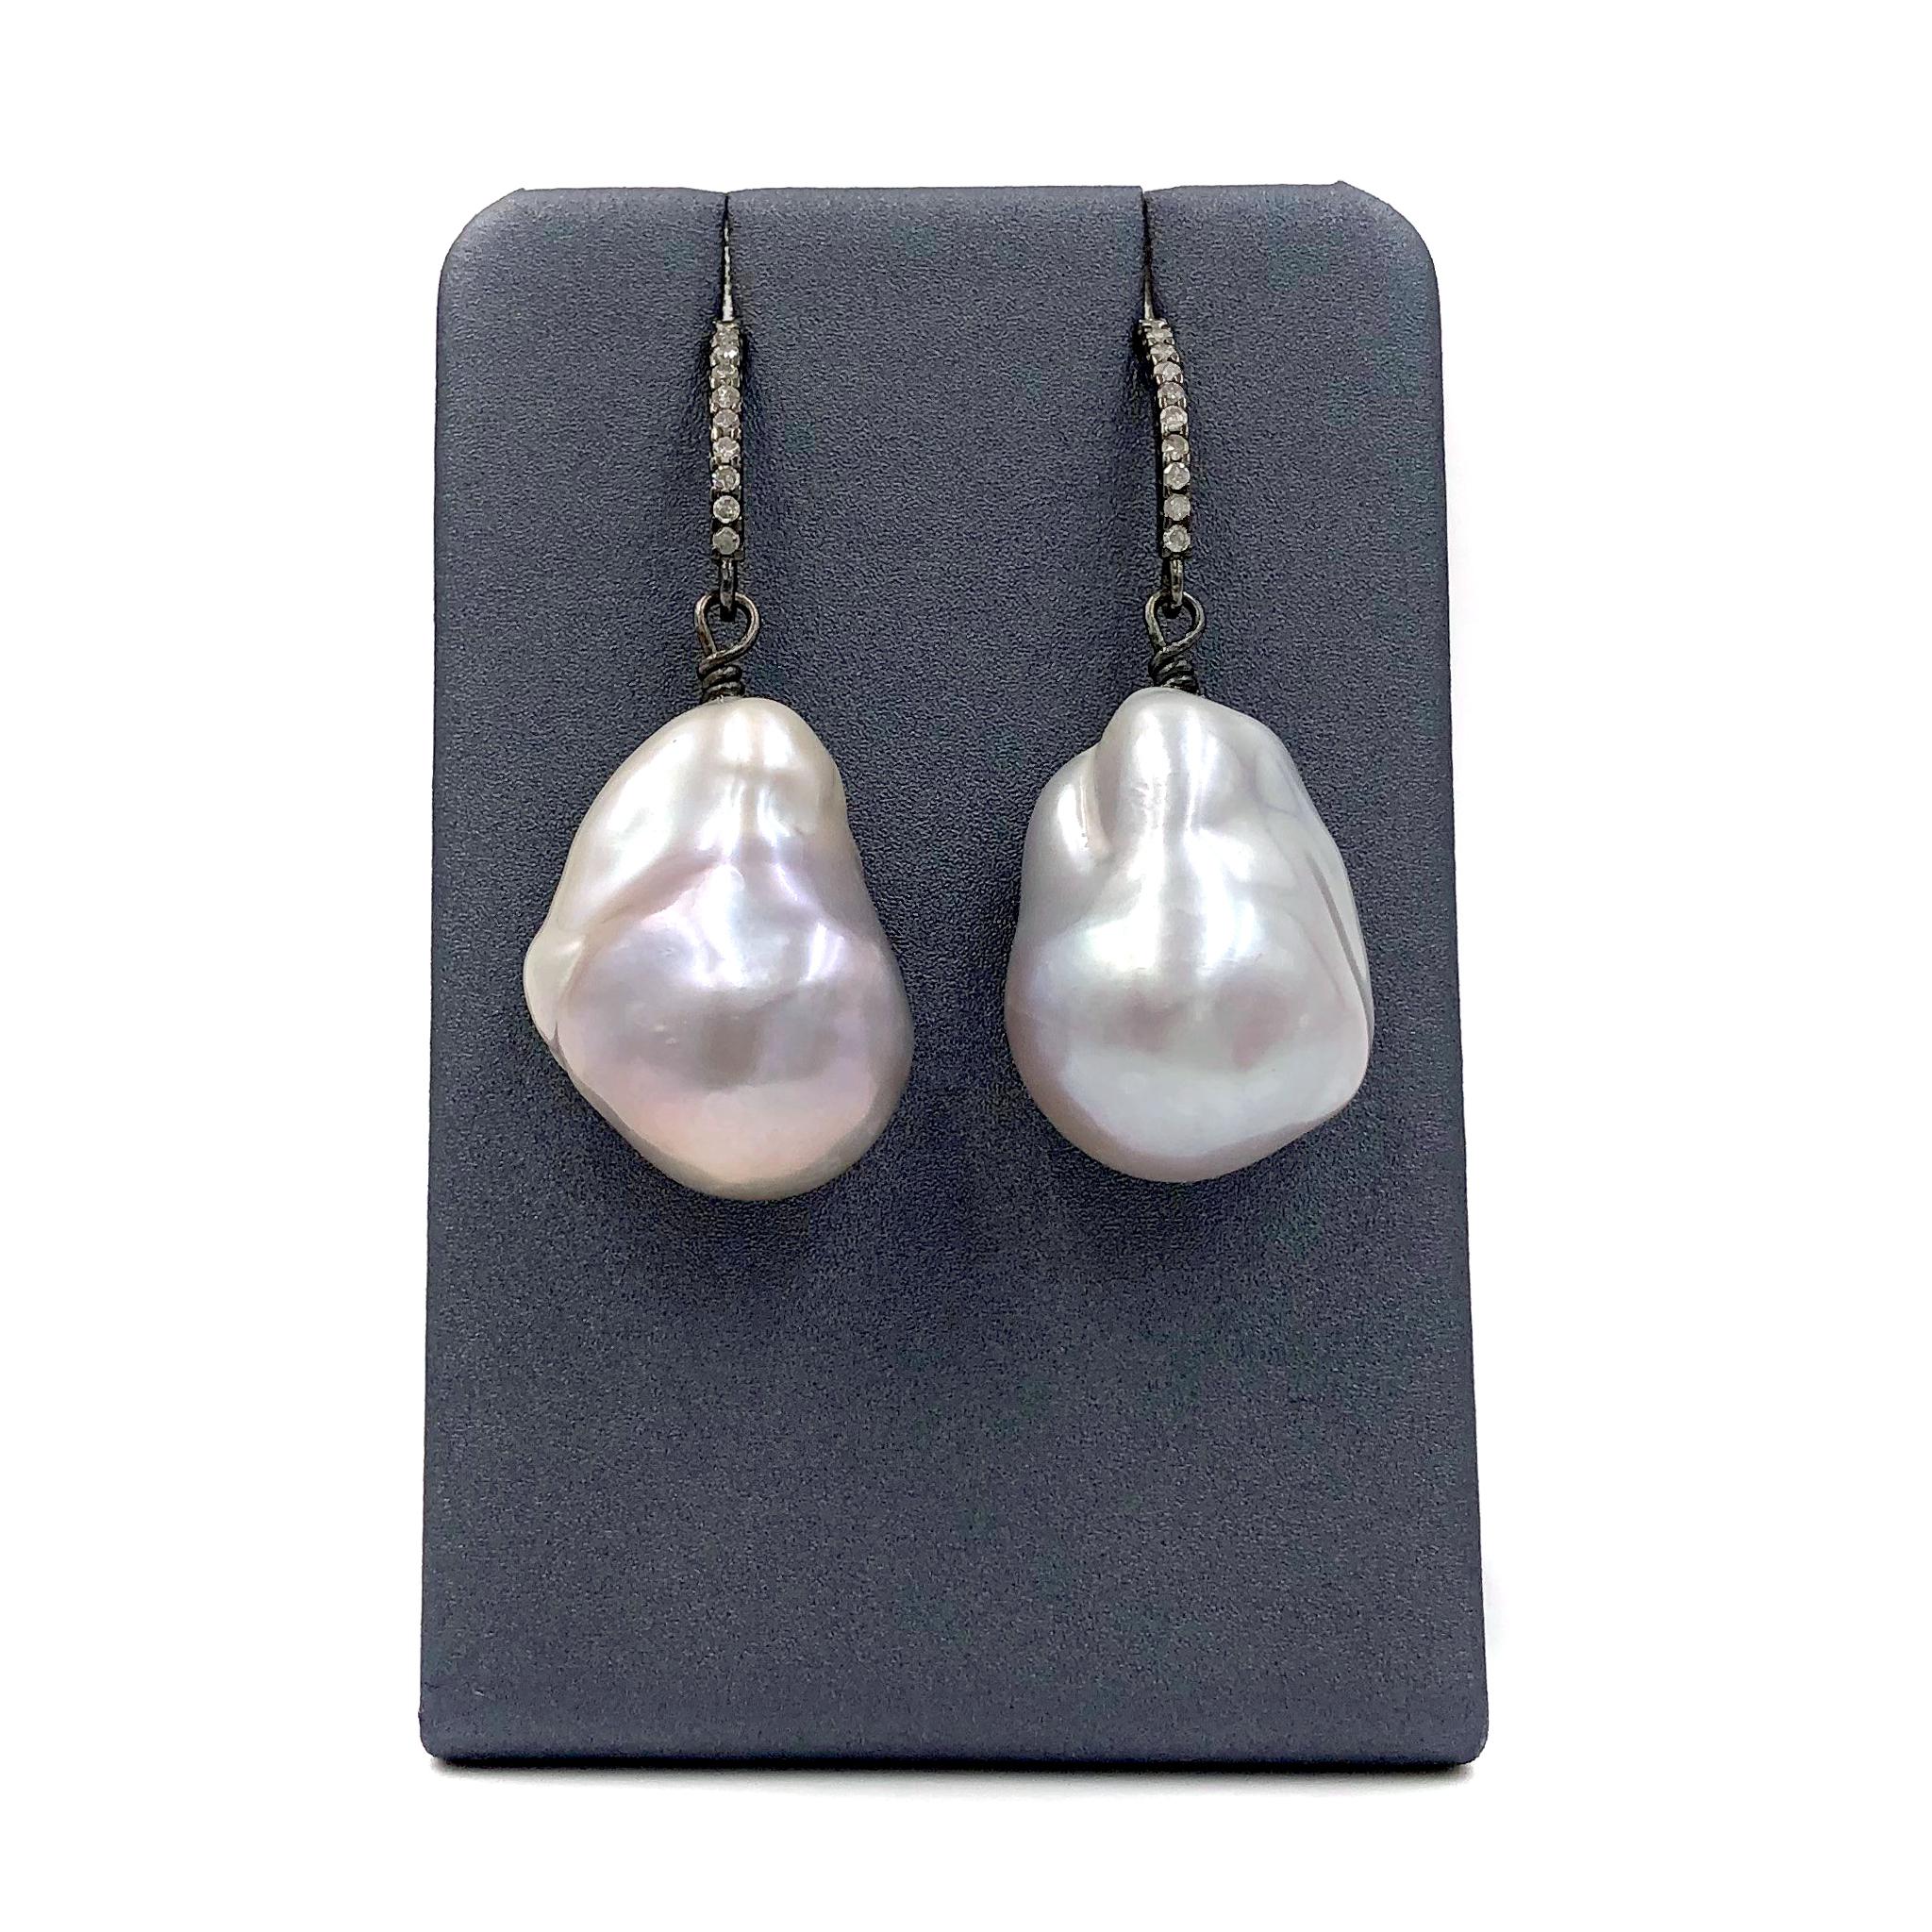 Silver Freshwater Baroque Pearl Drop Earrings on diamond-set, black rhodium-finished sterling silver ear wires. 